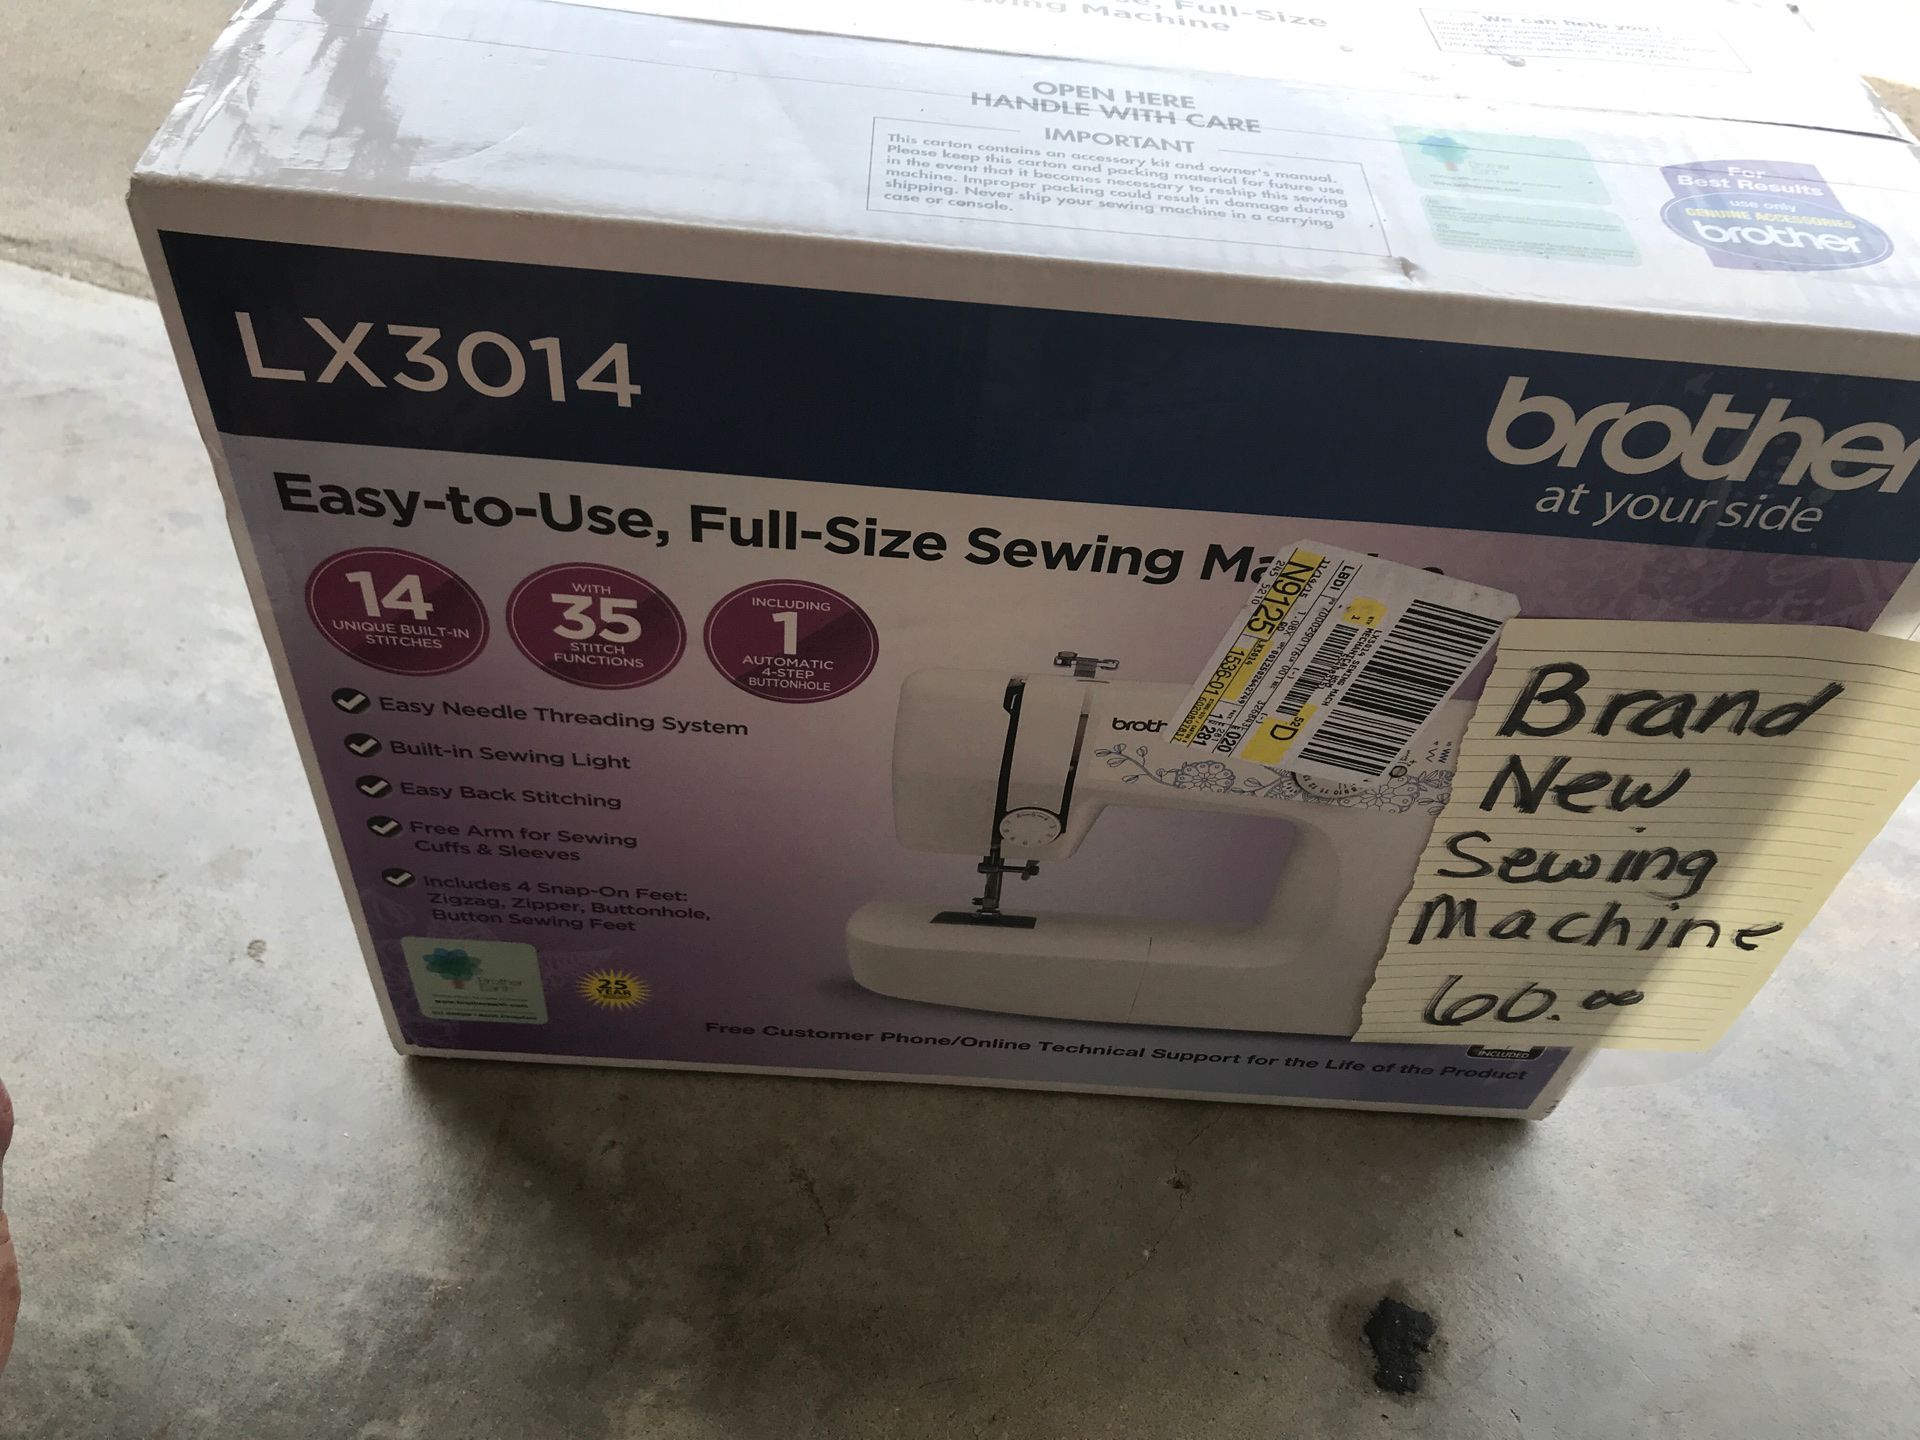 New unopened Brother sewing machine